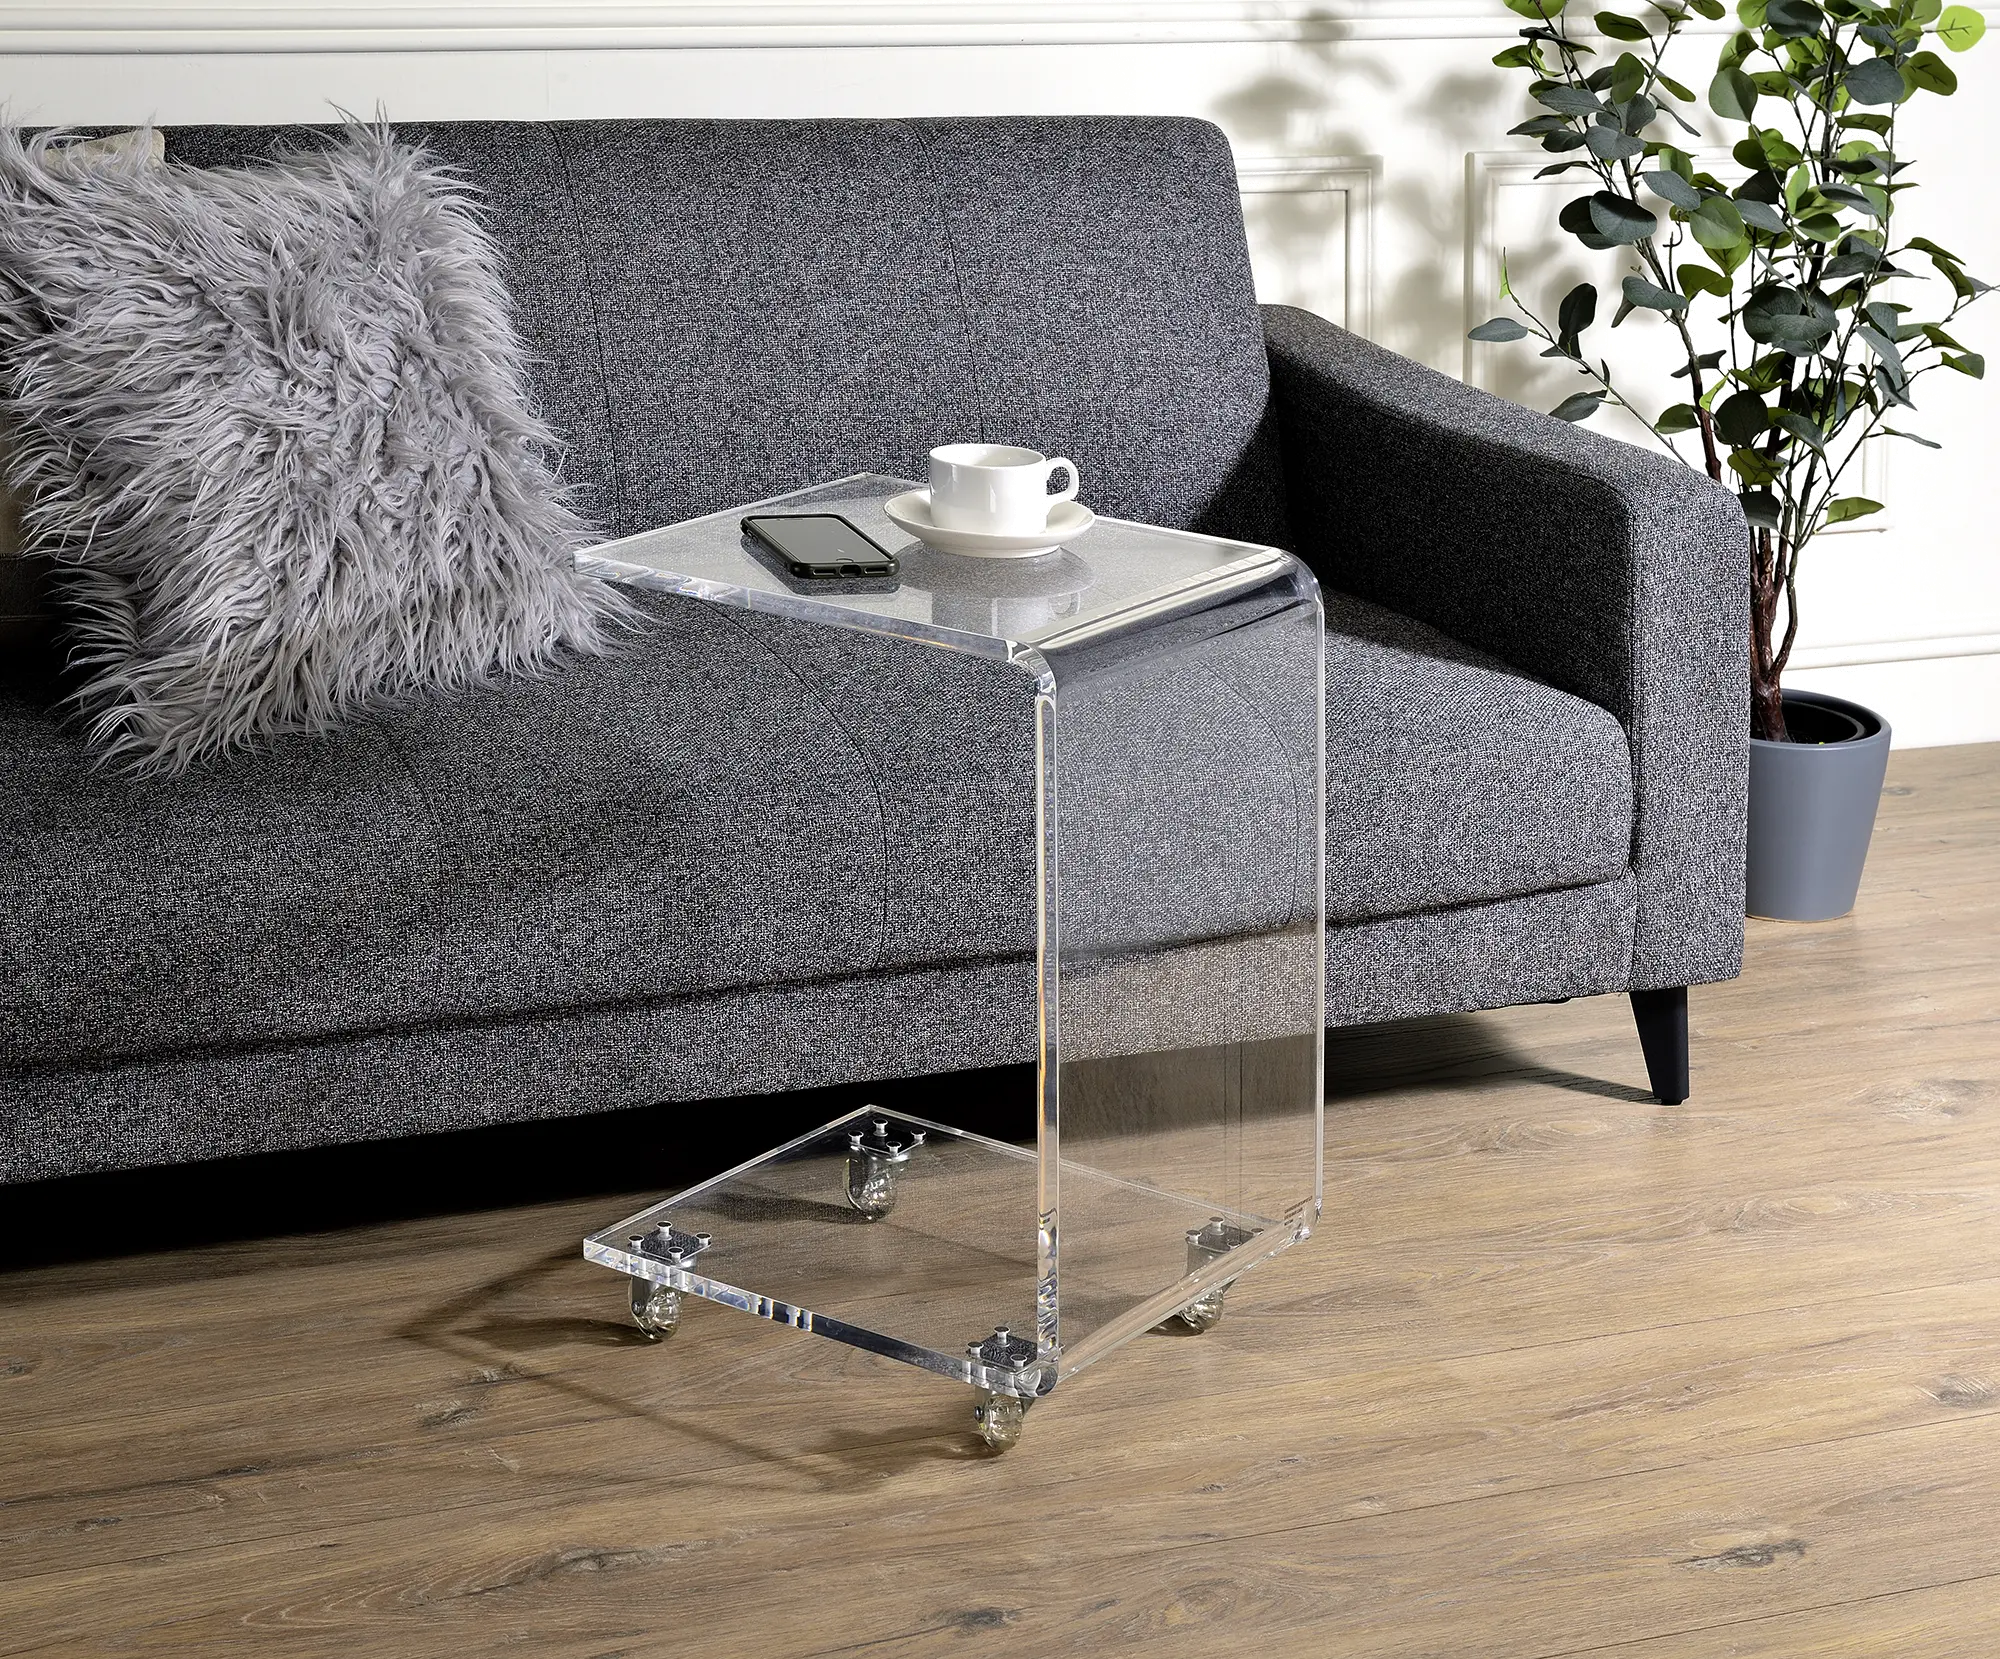 Photos - Dining Table Progressive A La Carte Rolling Acrylic Chairside C-Table A620-29